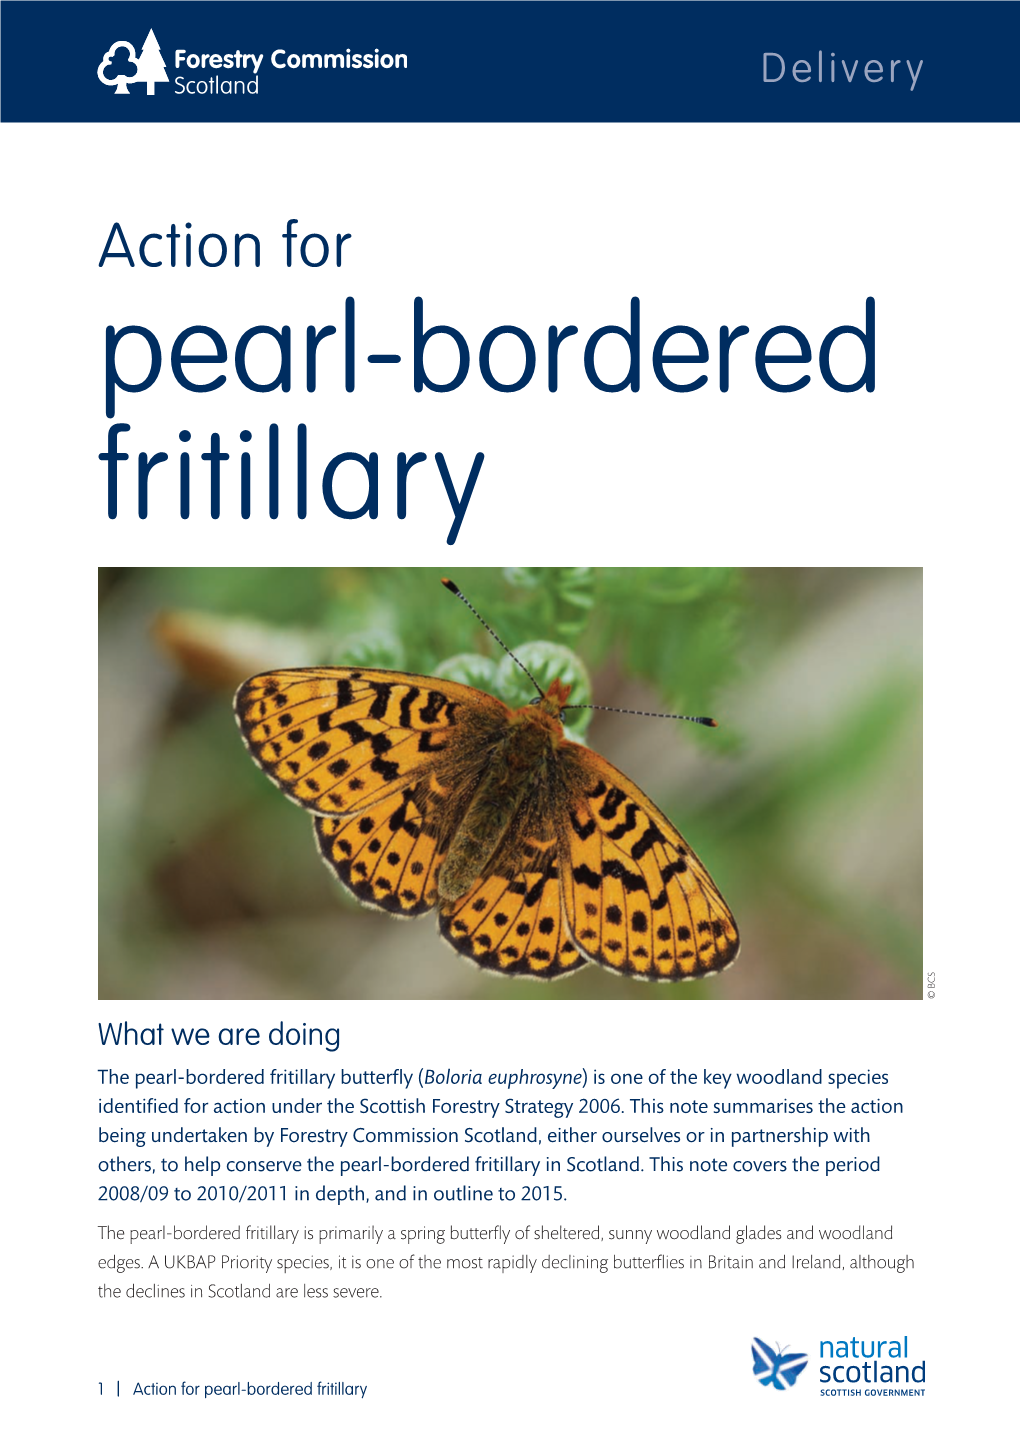 Action for Pearl Bordered Fritillary